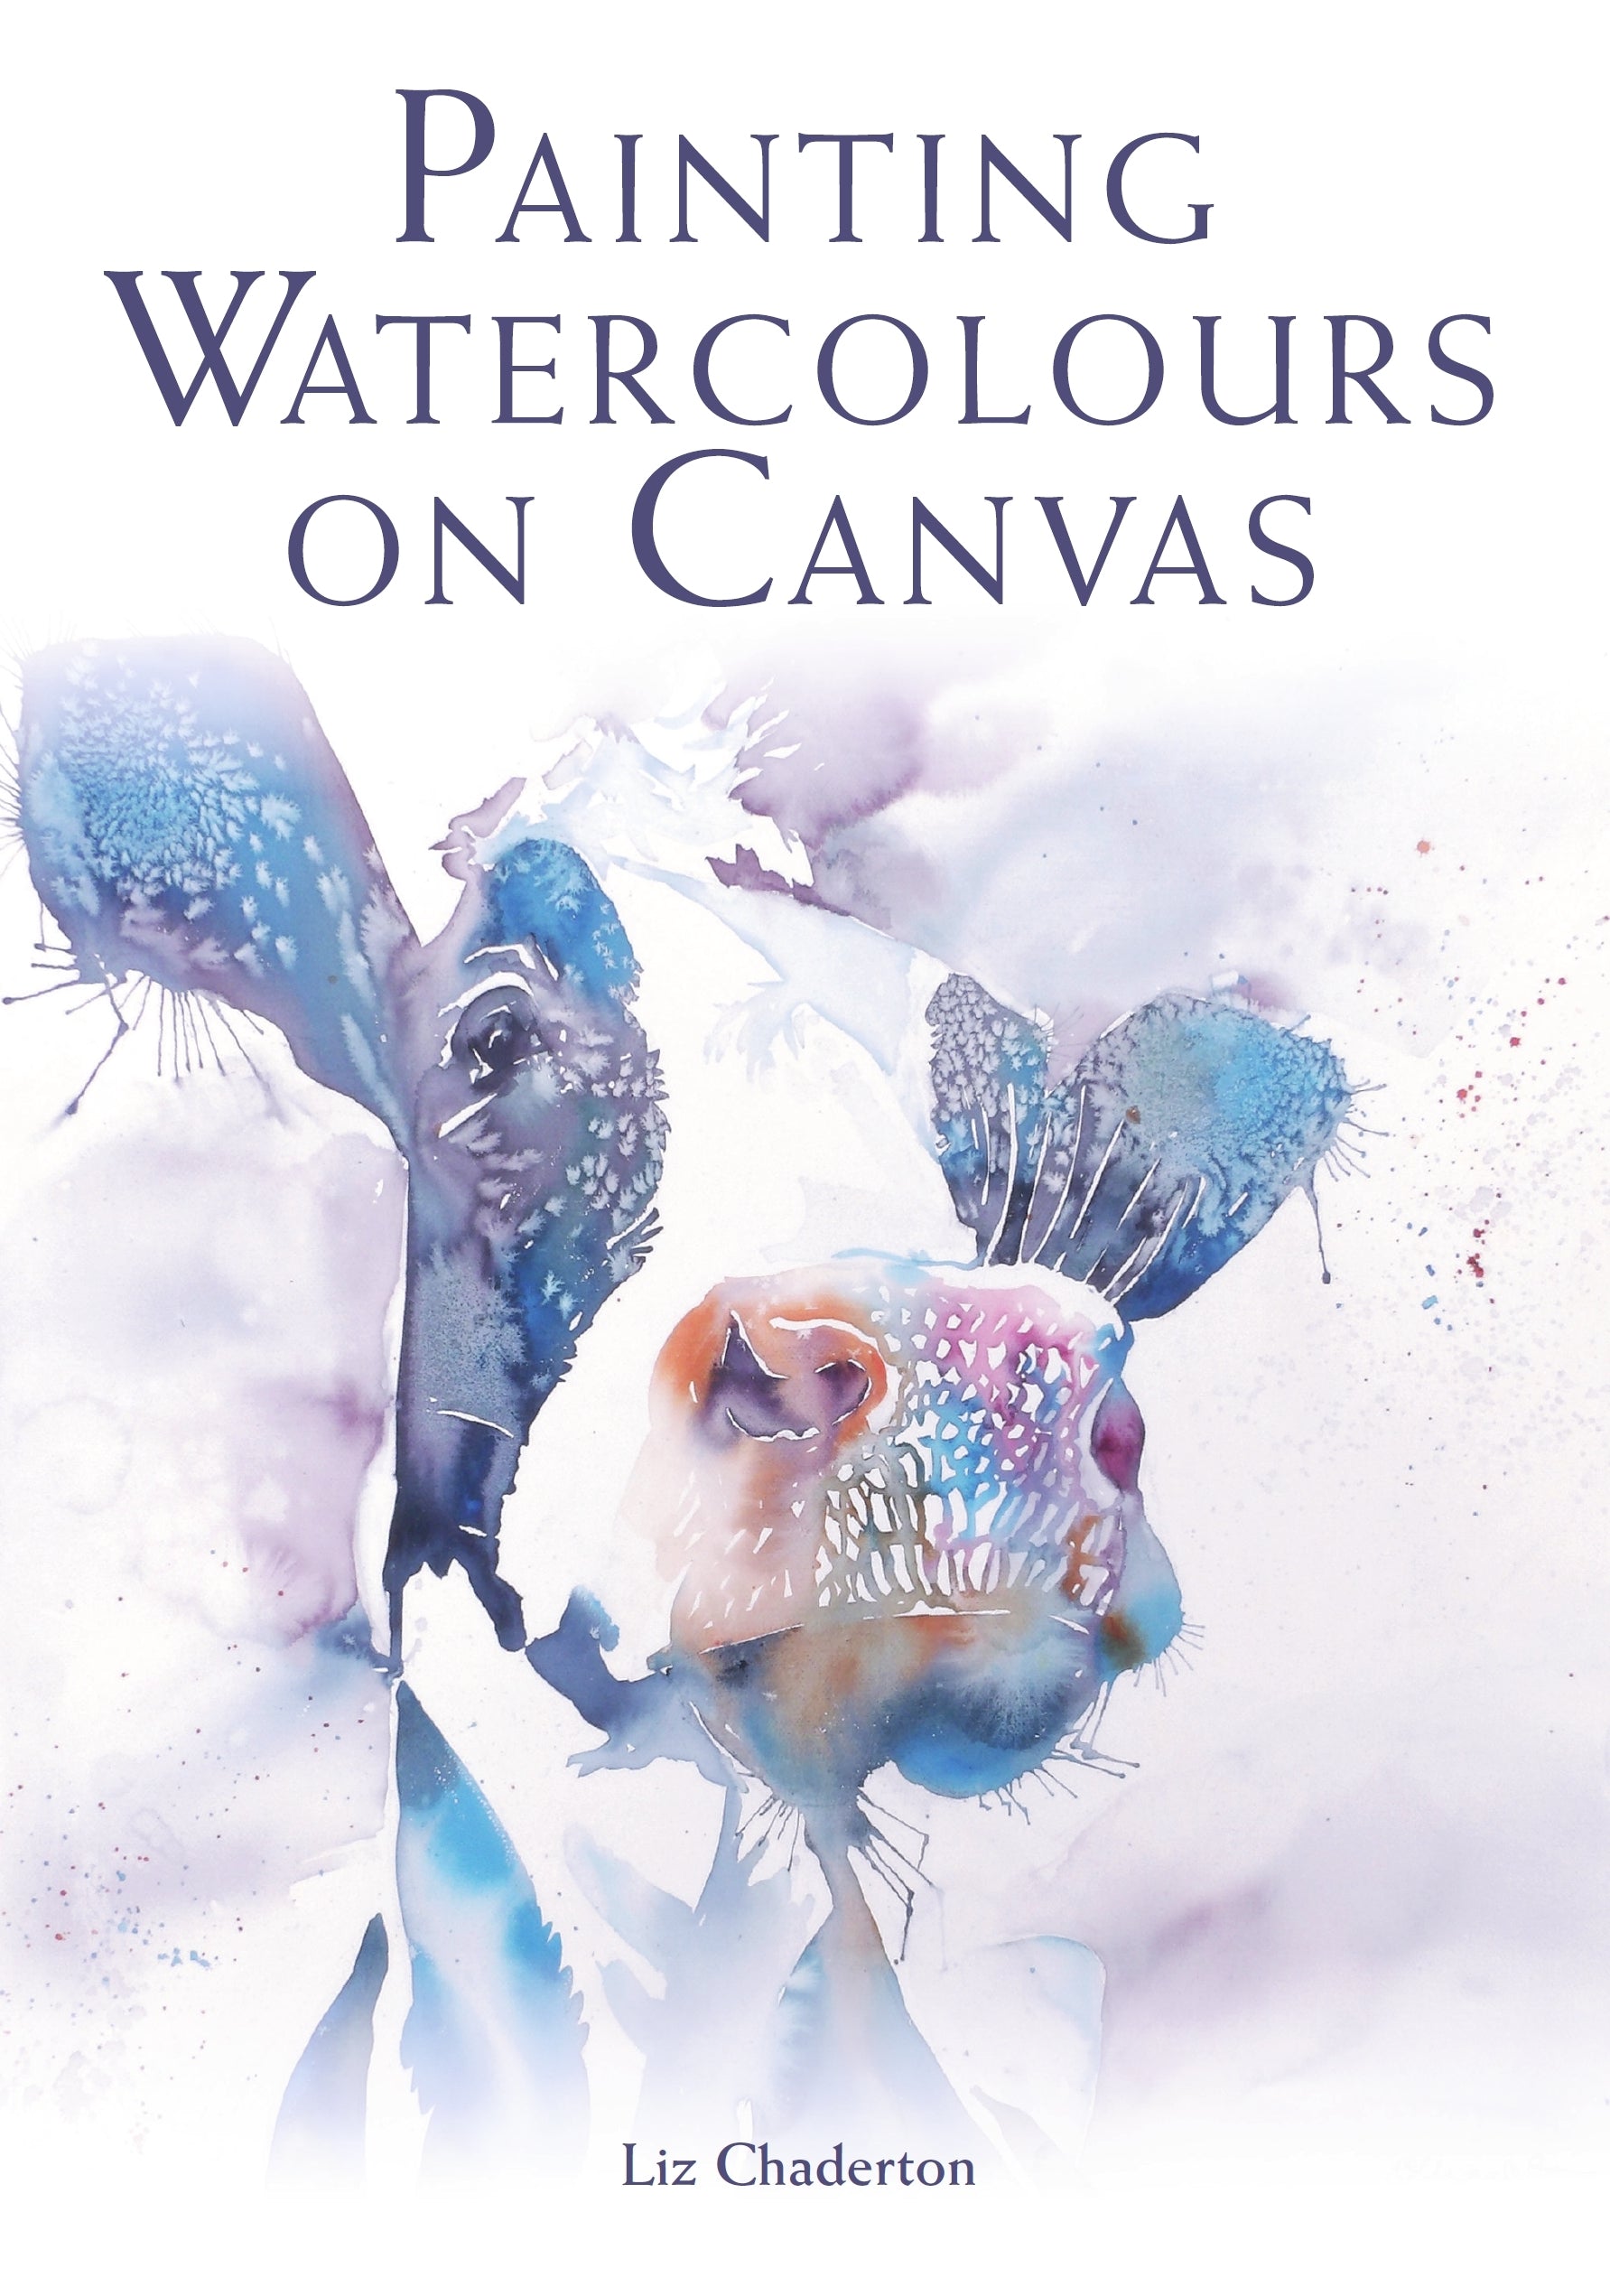 Painting Watercolours on Canvas